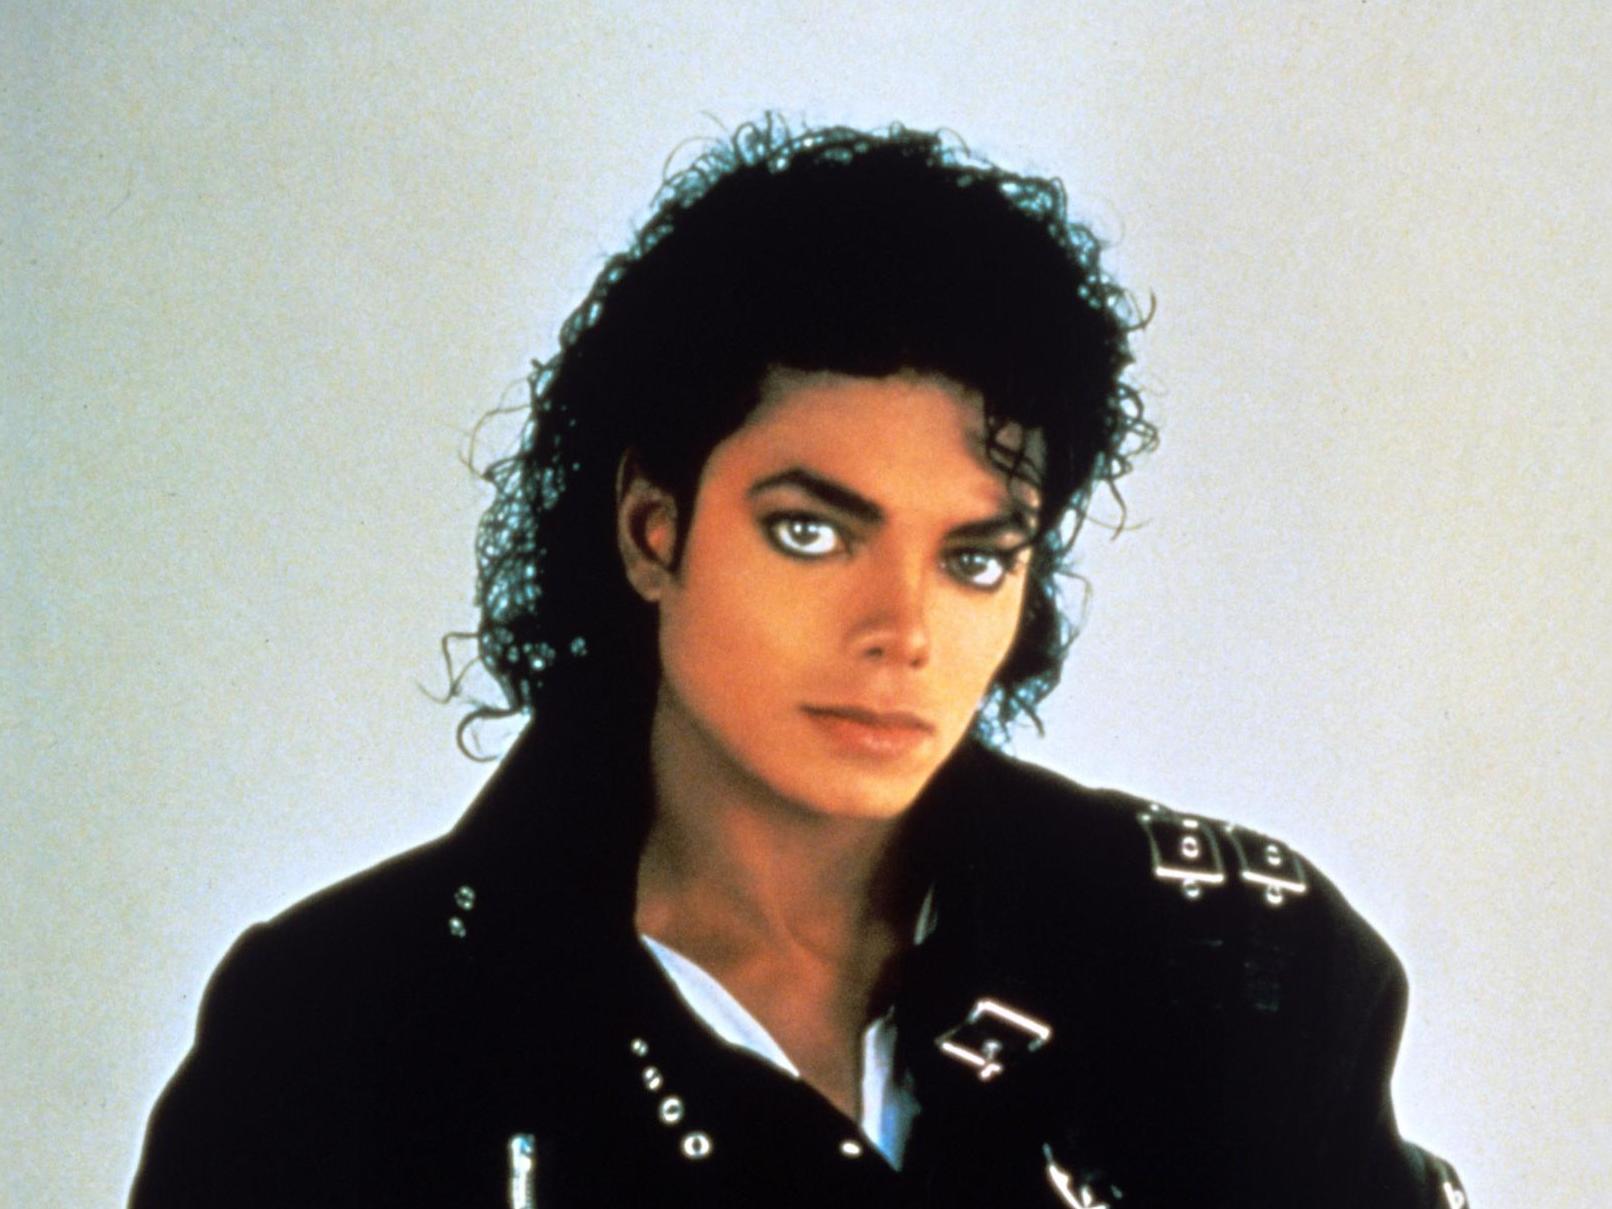 Happy Birthday, Michael Jackson. 

You will always be the king of pop. Rest easy. 